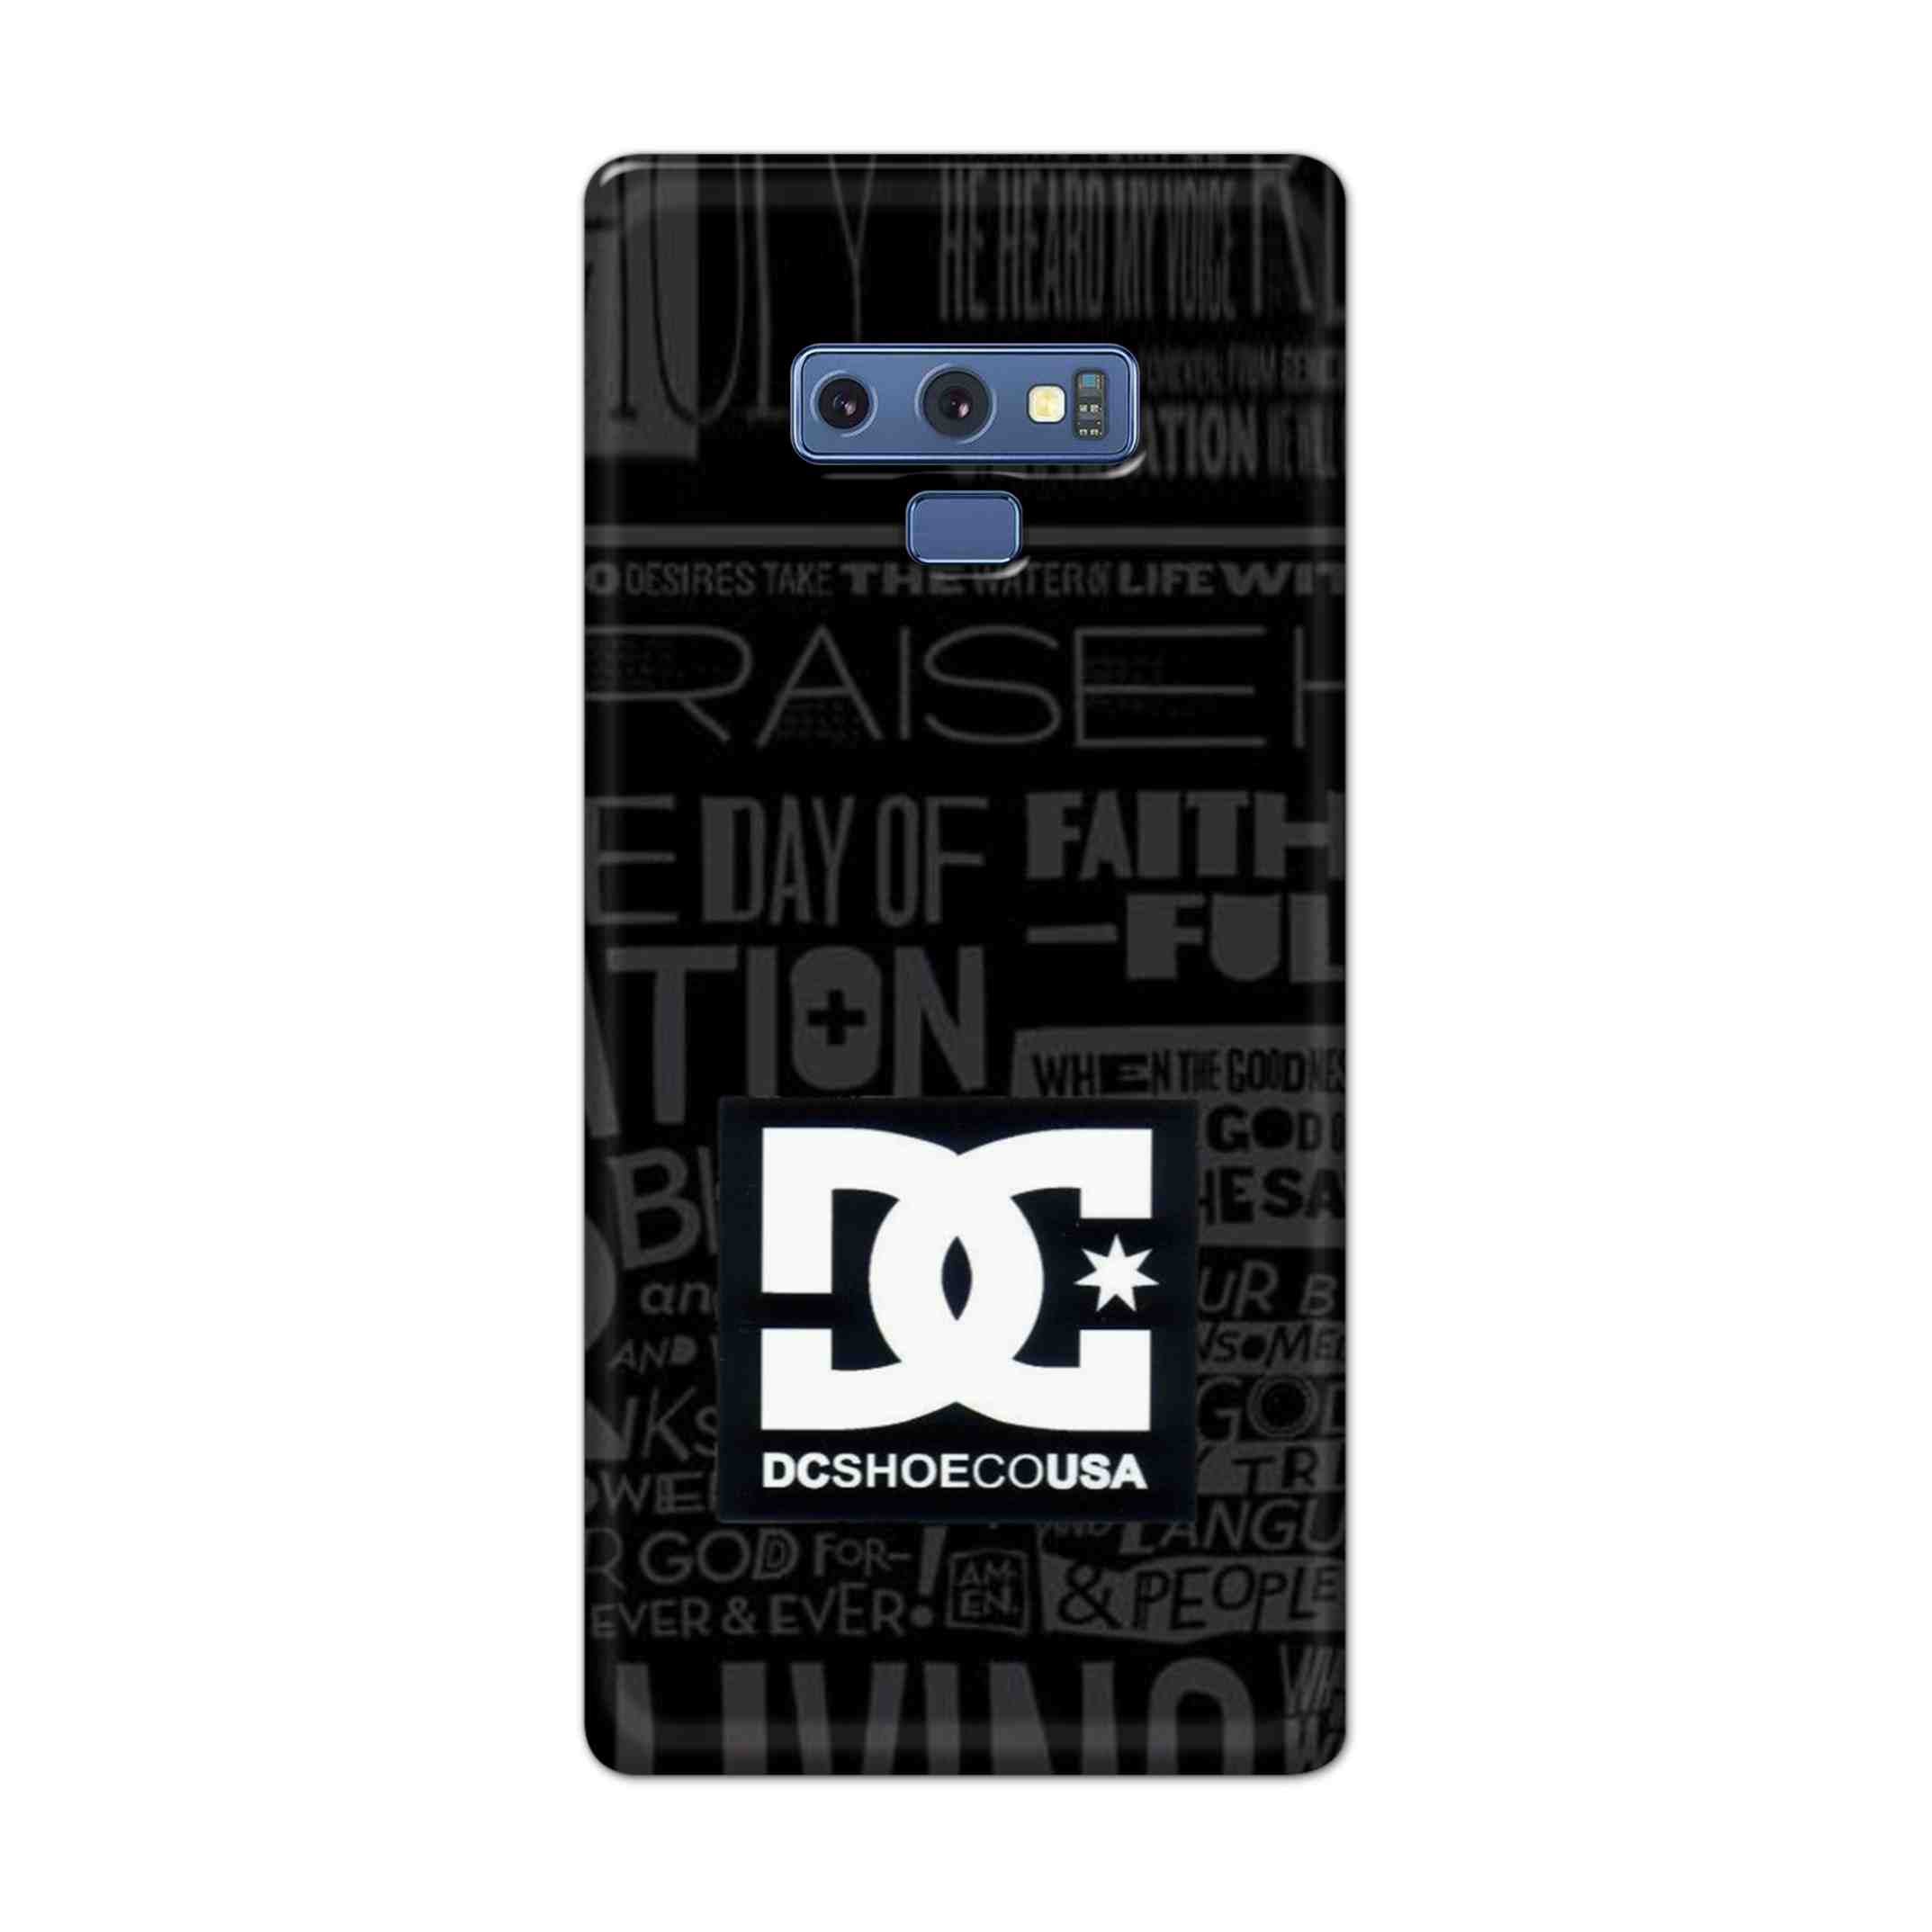 Buy Dc Shoecousa Hard Back Mobile Phone Case Cover For Samsung Galaxy Note 9 Online